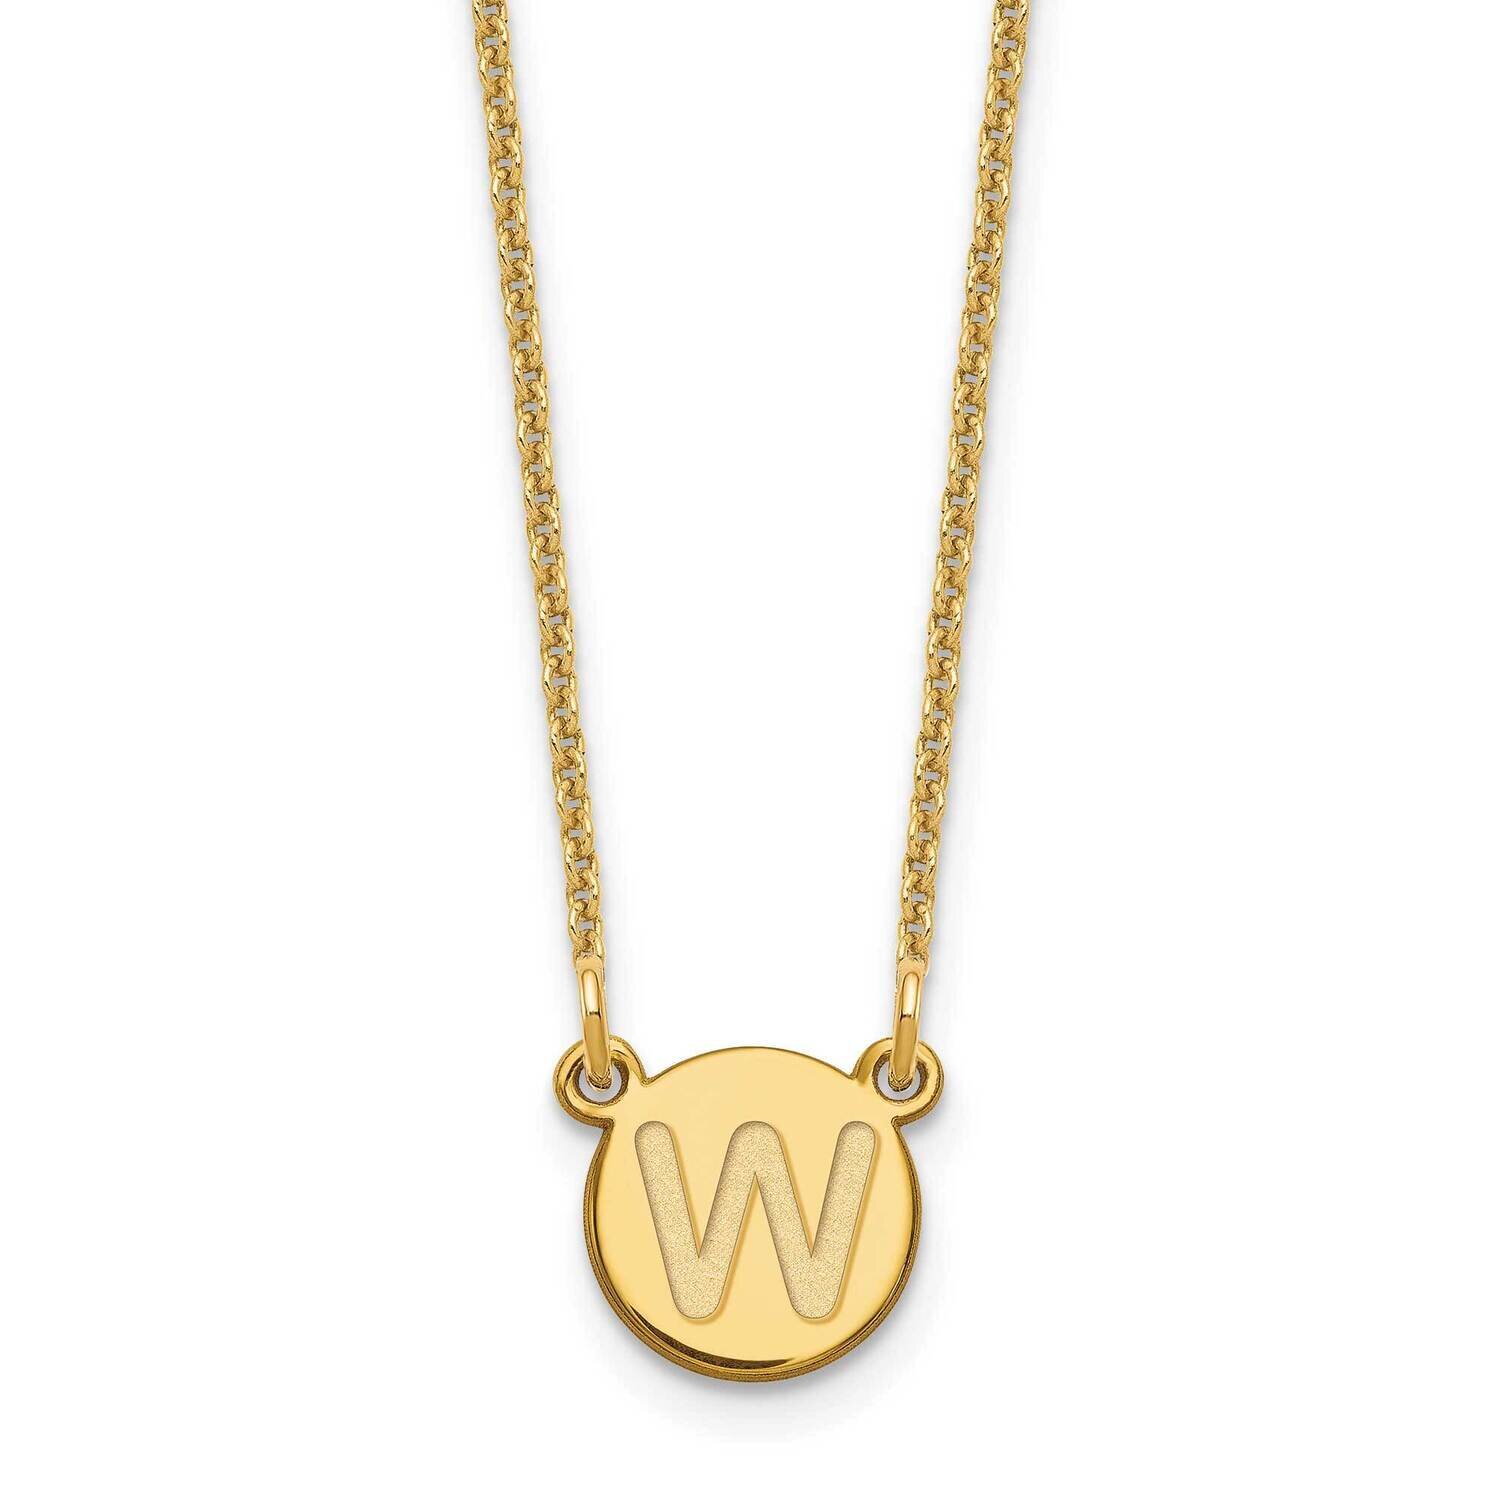 Tiny Circle Block Initial Letter W Necklace 14k Gold XNA722Y/W